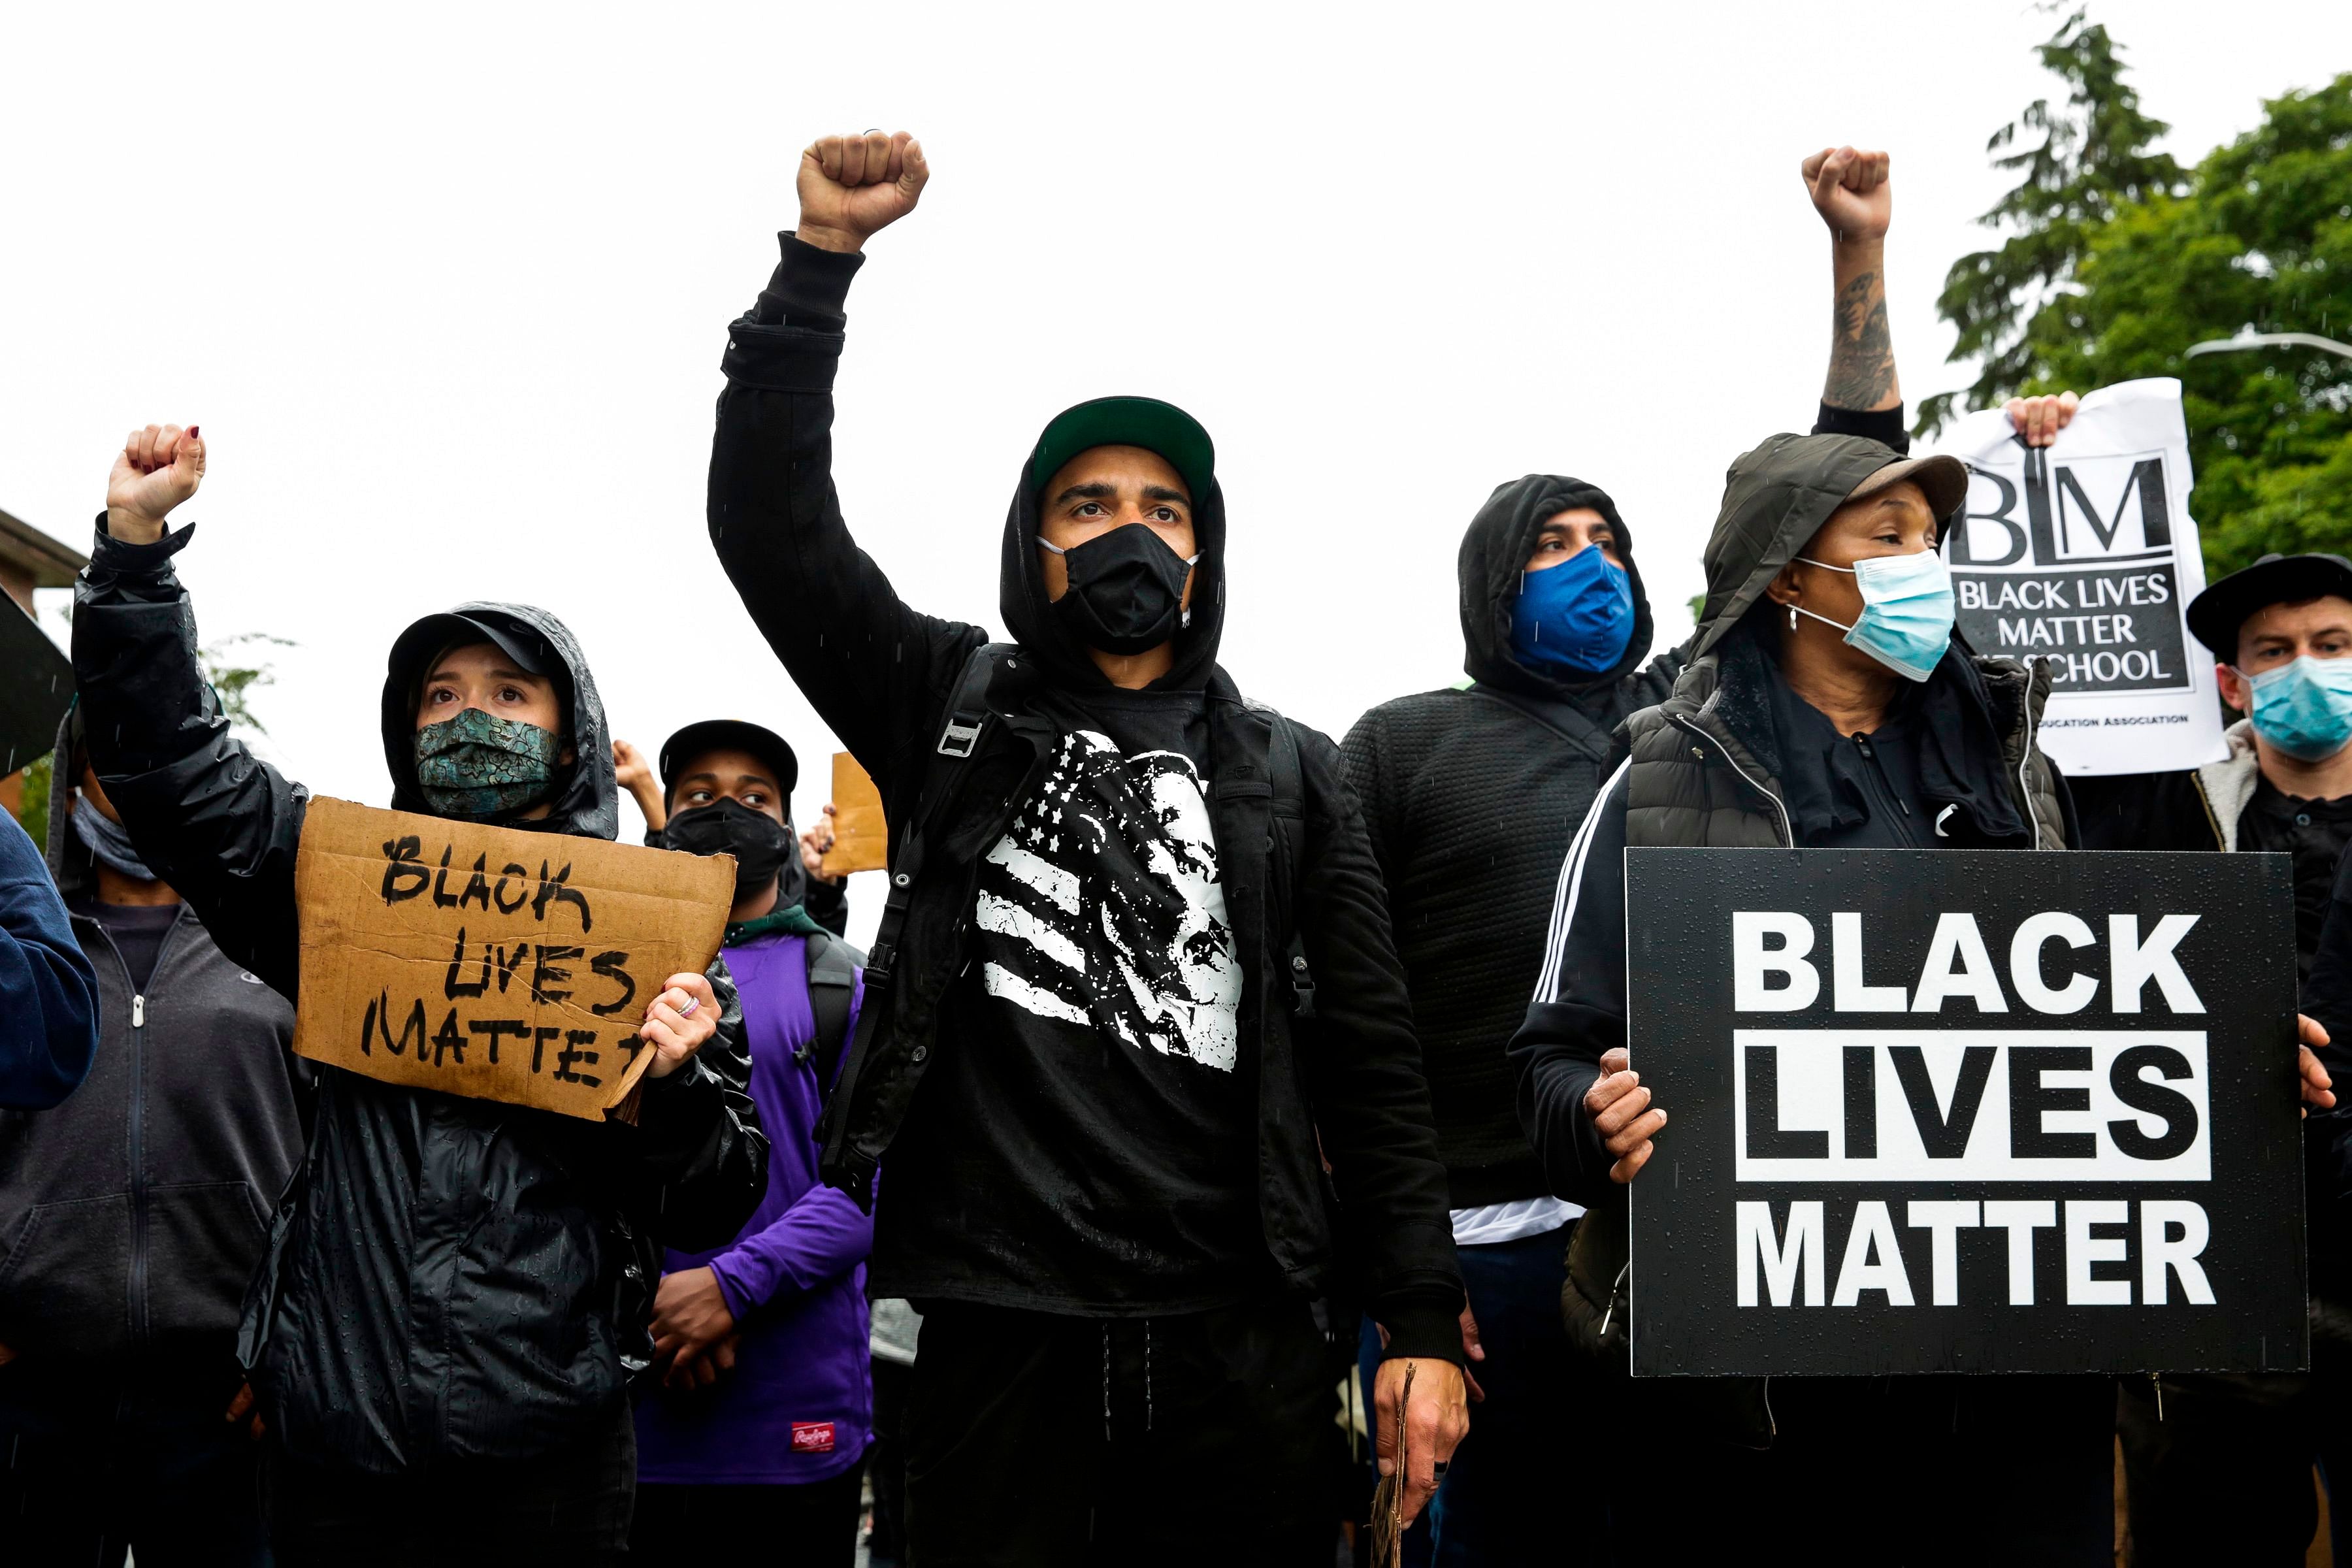 People take part in a "March of Silence" from Judkins Park to Jefferson Park and a statewide general strike in support of all Black lives in Seattle. Credit: AFP Photo